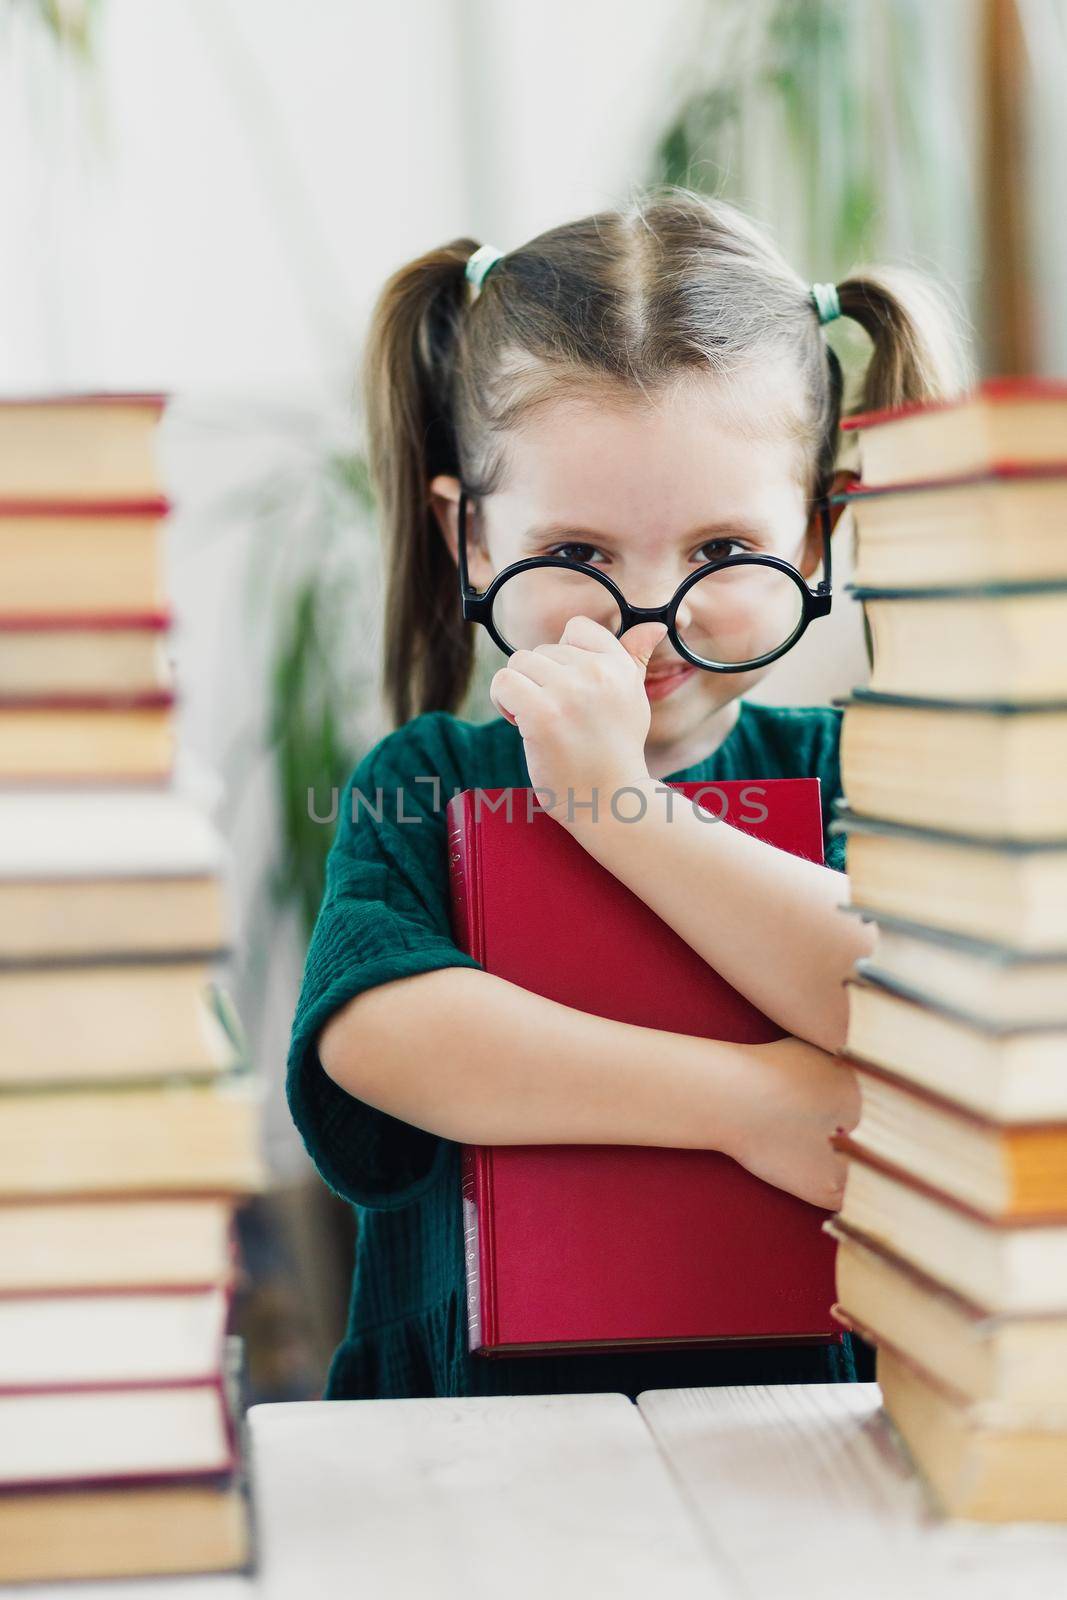 Cute little girl in green dress with red book in her hands fixing a glasses on her nose. Reading and education concept.